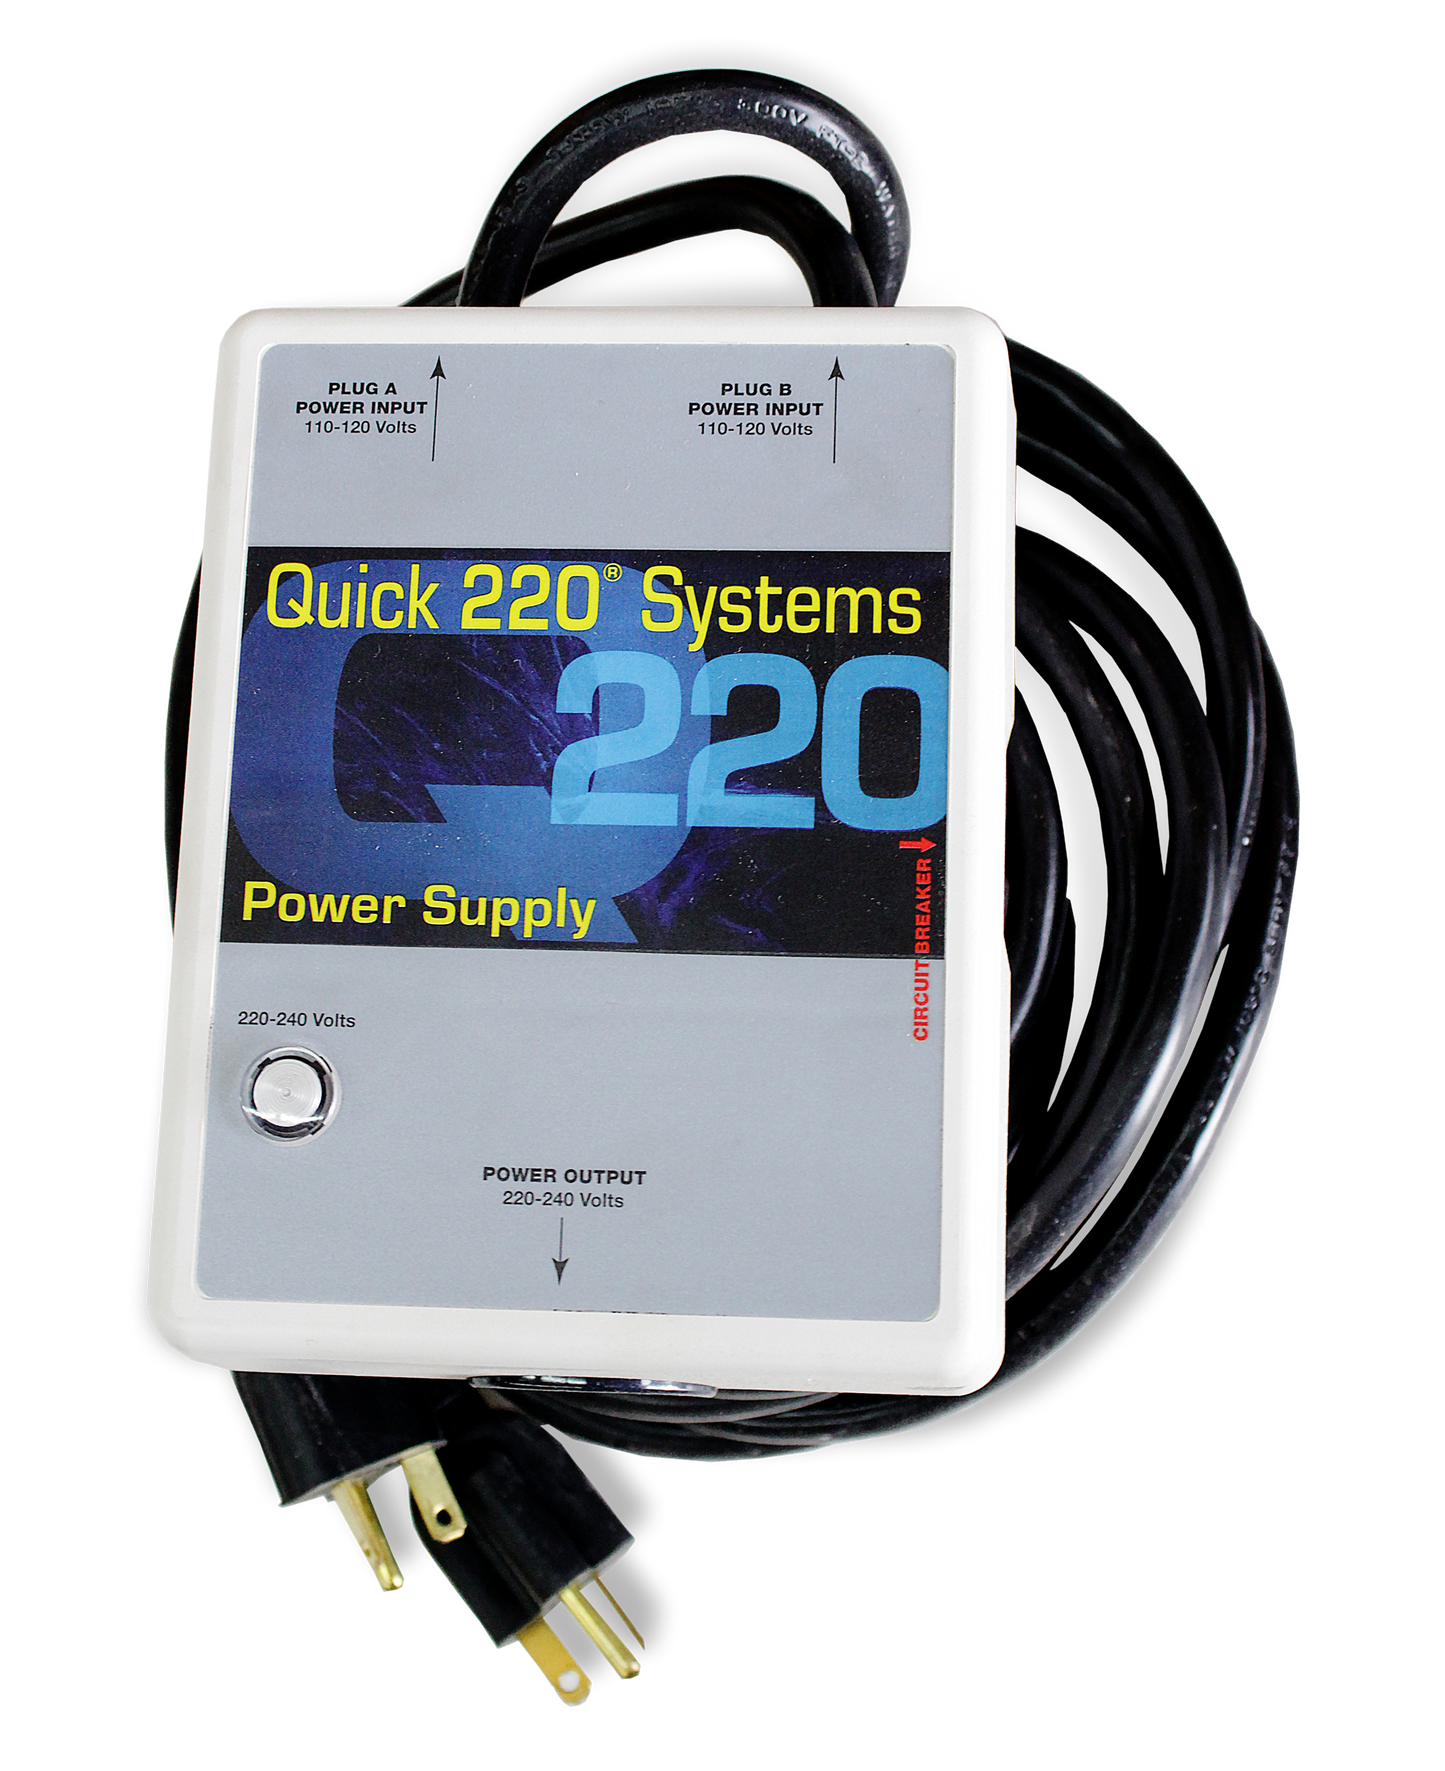 Quick 220 Systems Power Supply